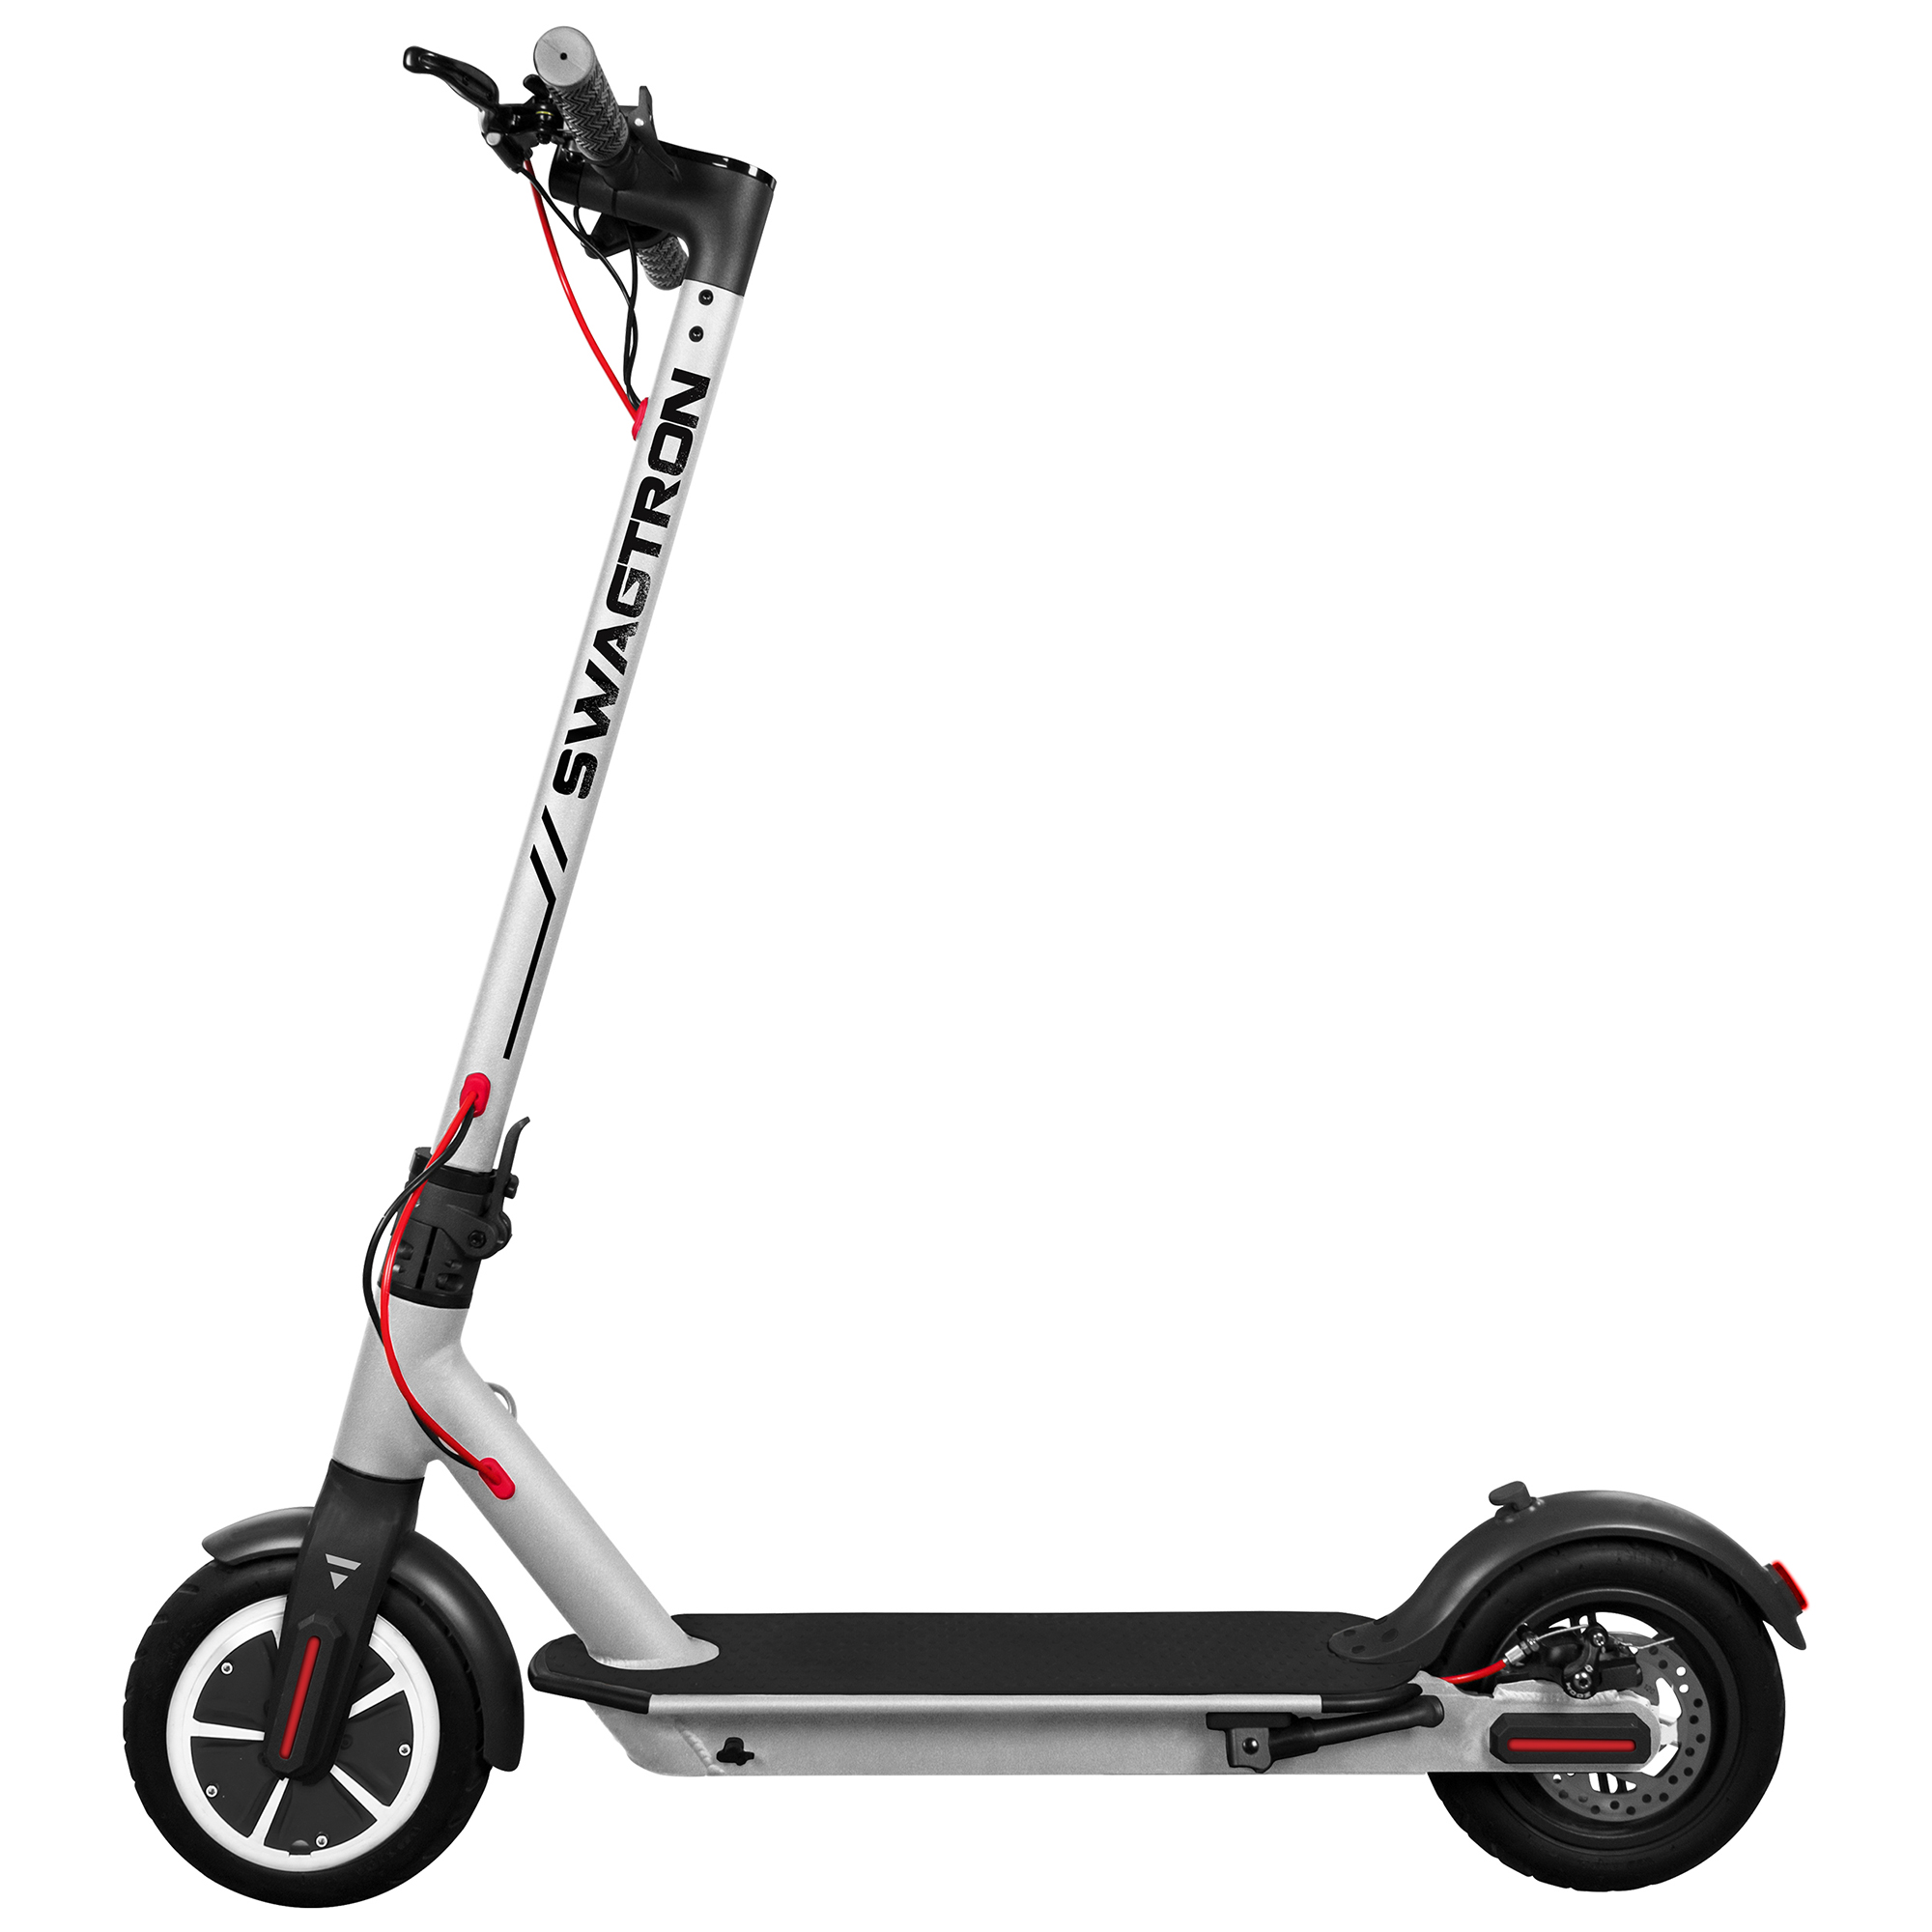 The Swagger 5 Elite electric scooter is available for $199.99—the lowest price ever—this Memorial Day weekend.